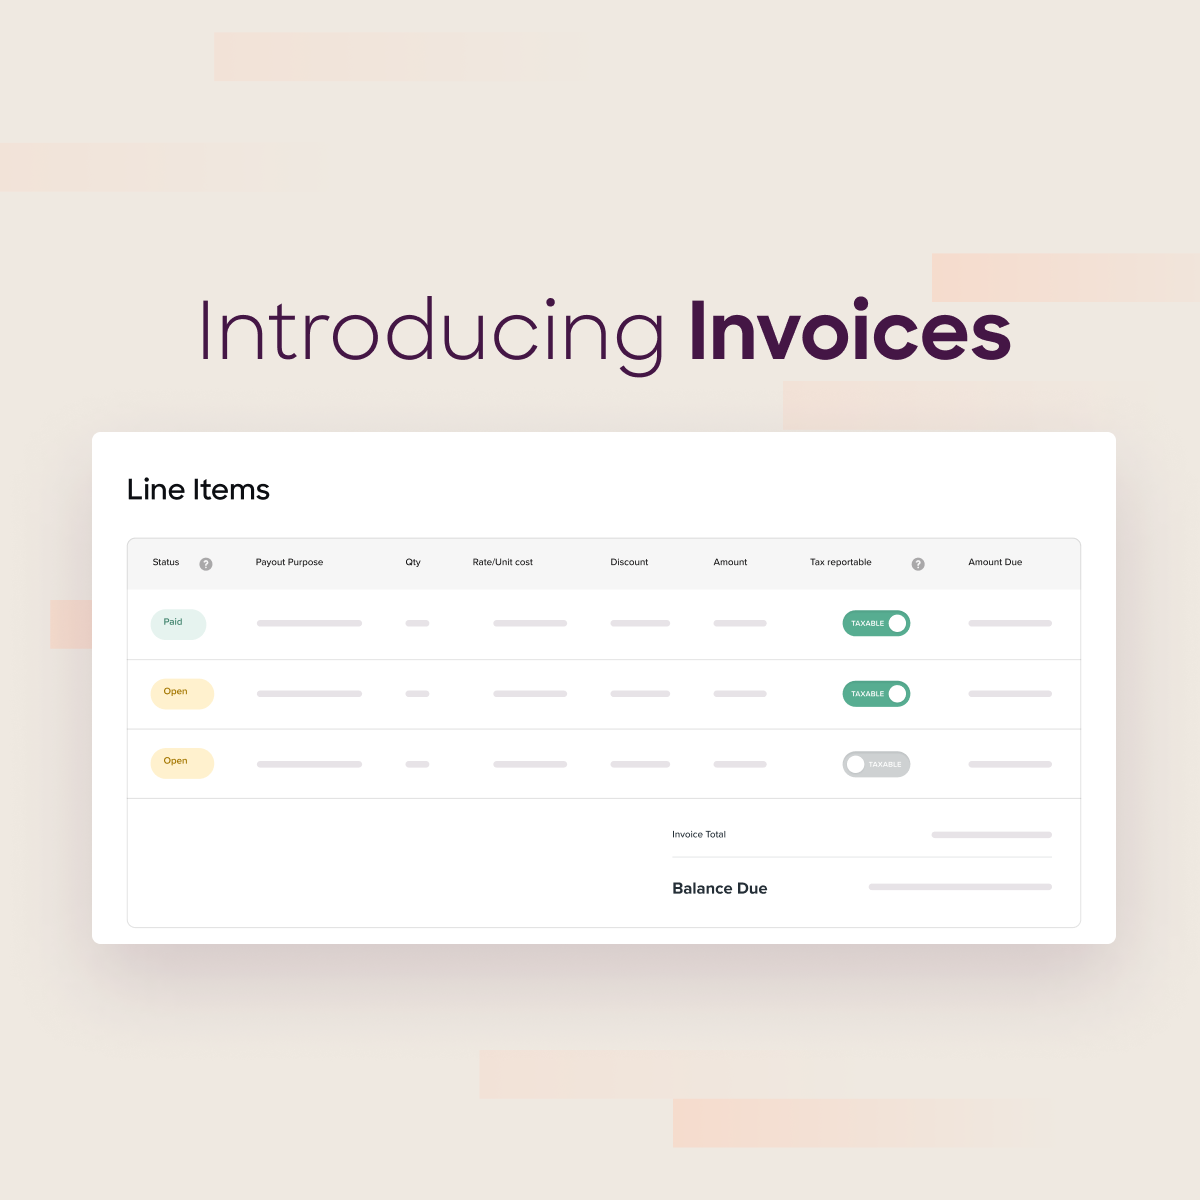 Simplify payouts with invoice-style, line-item detail